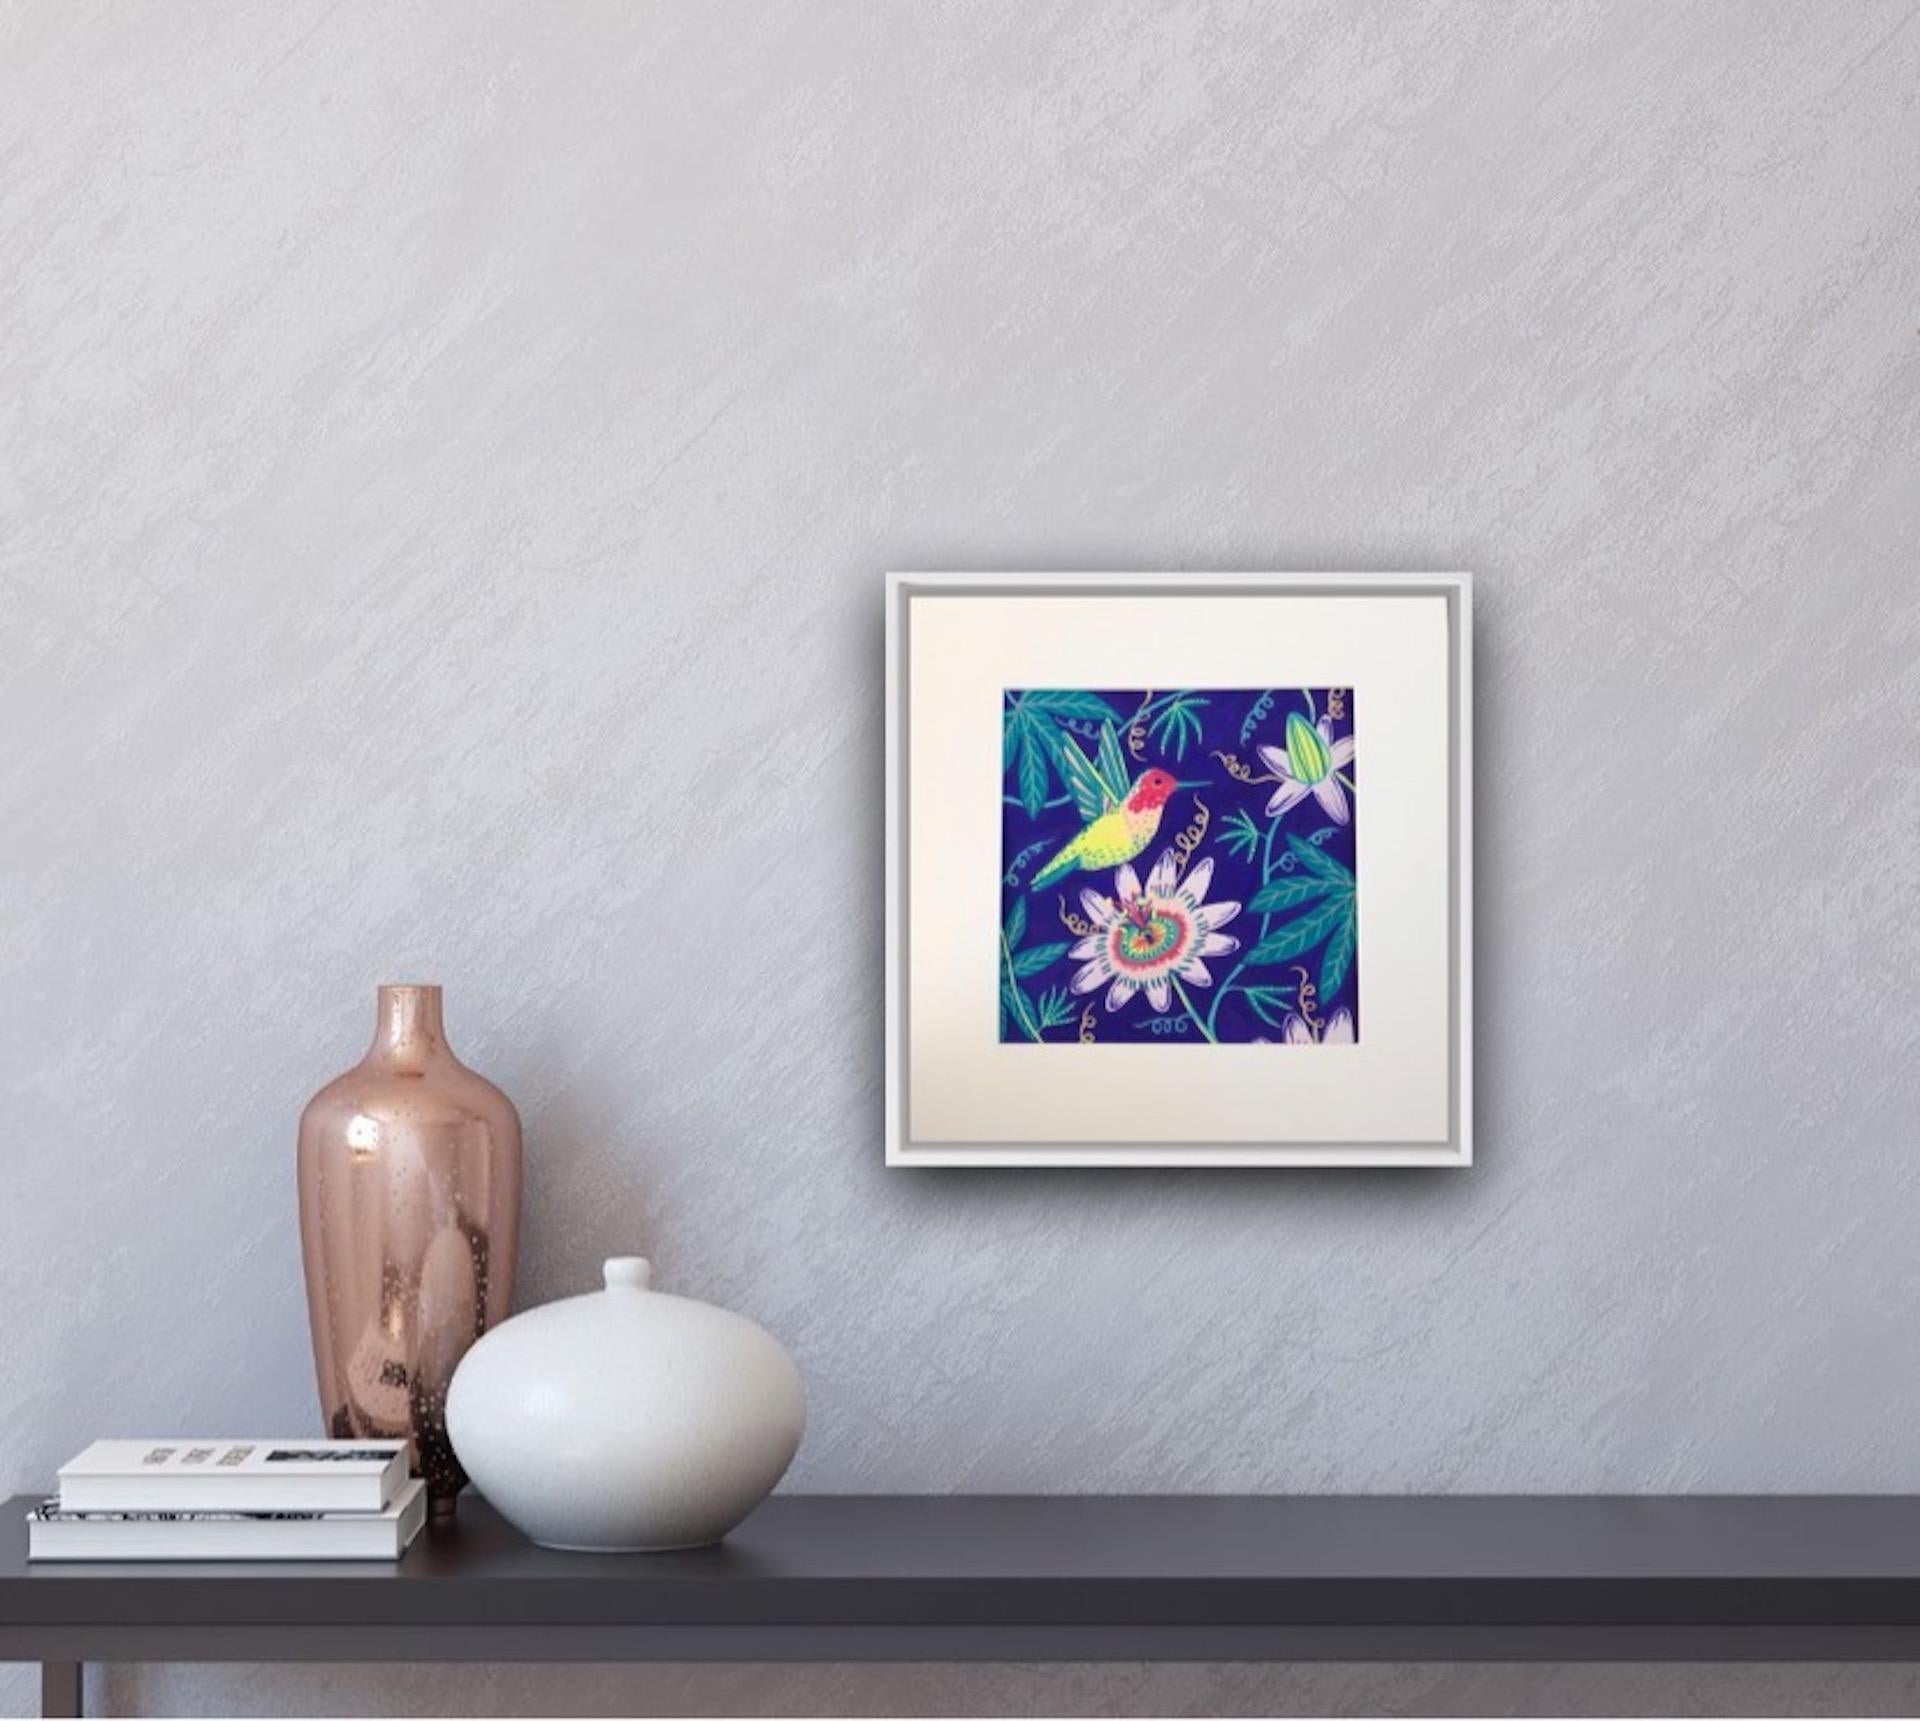 Jenny Evans, Hummingbird Over Passionflowers, Original Painting, Affordable Art For Sale 2